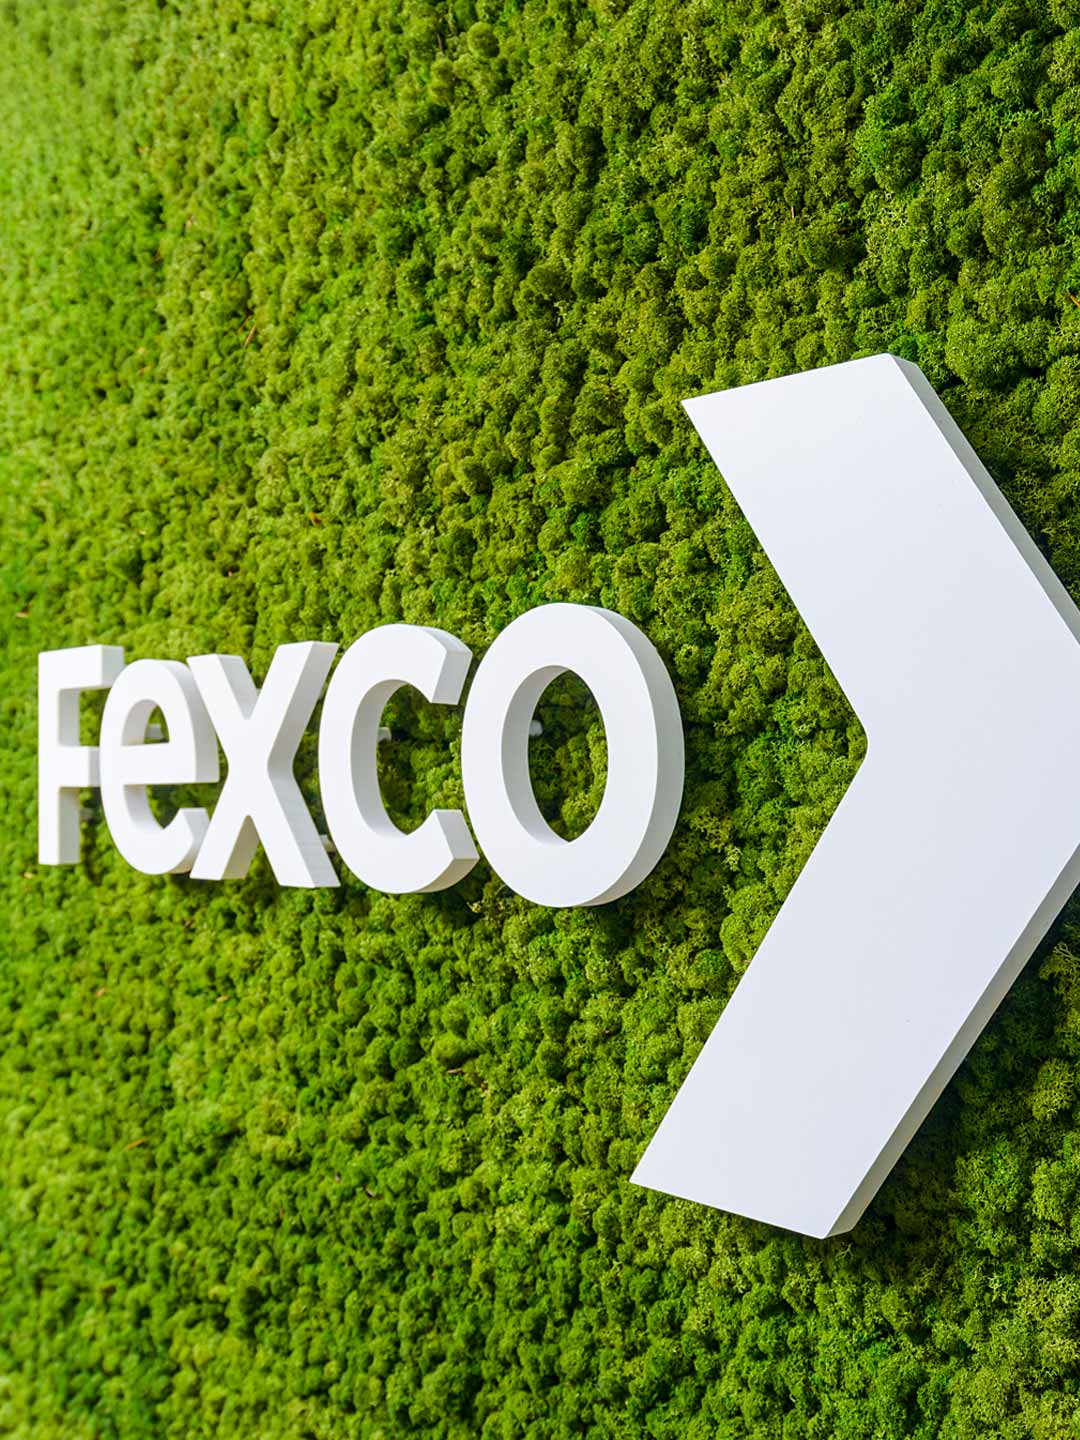 Fexco living wall